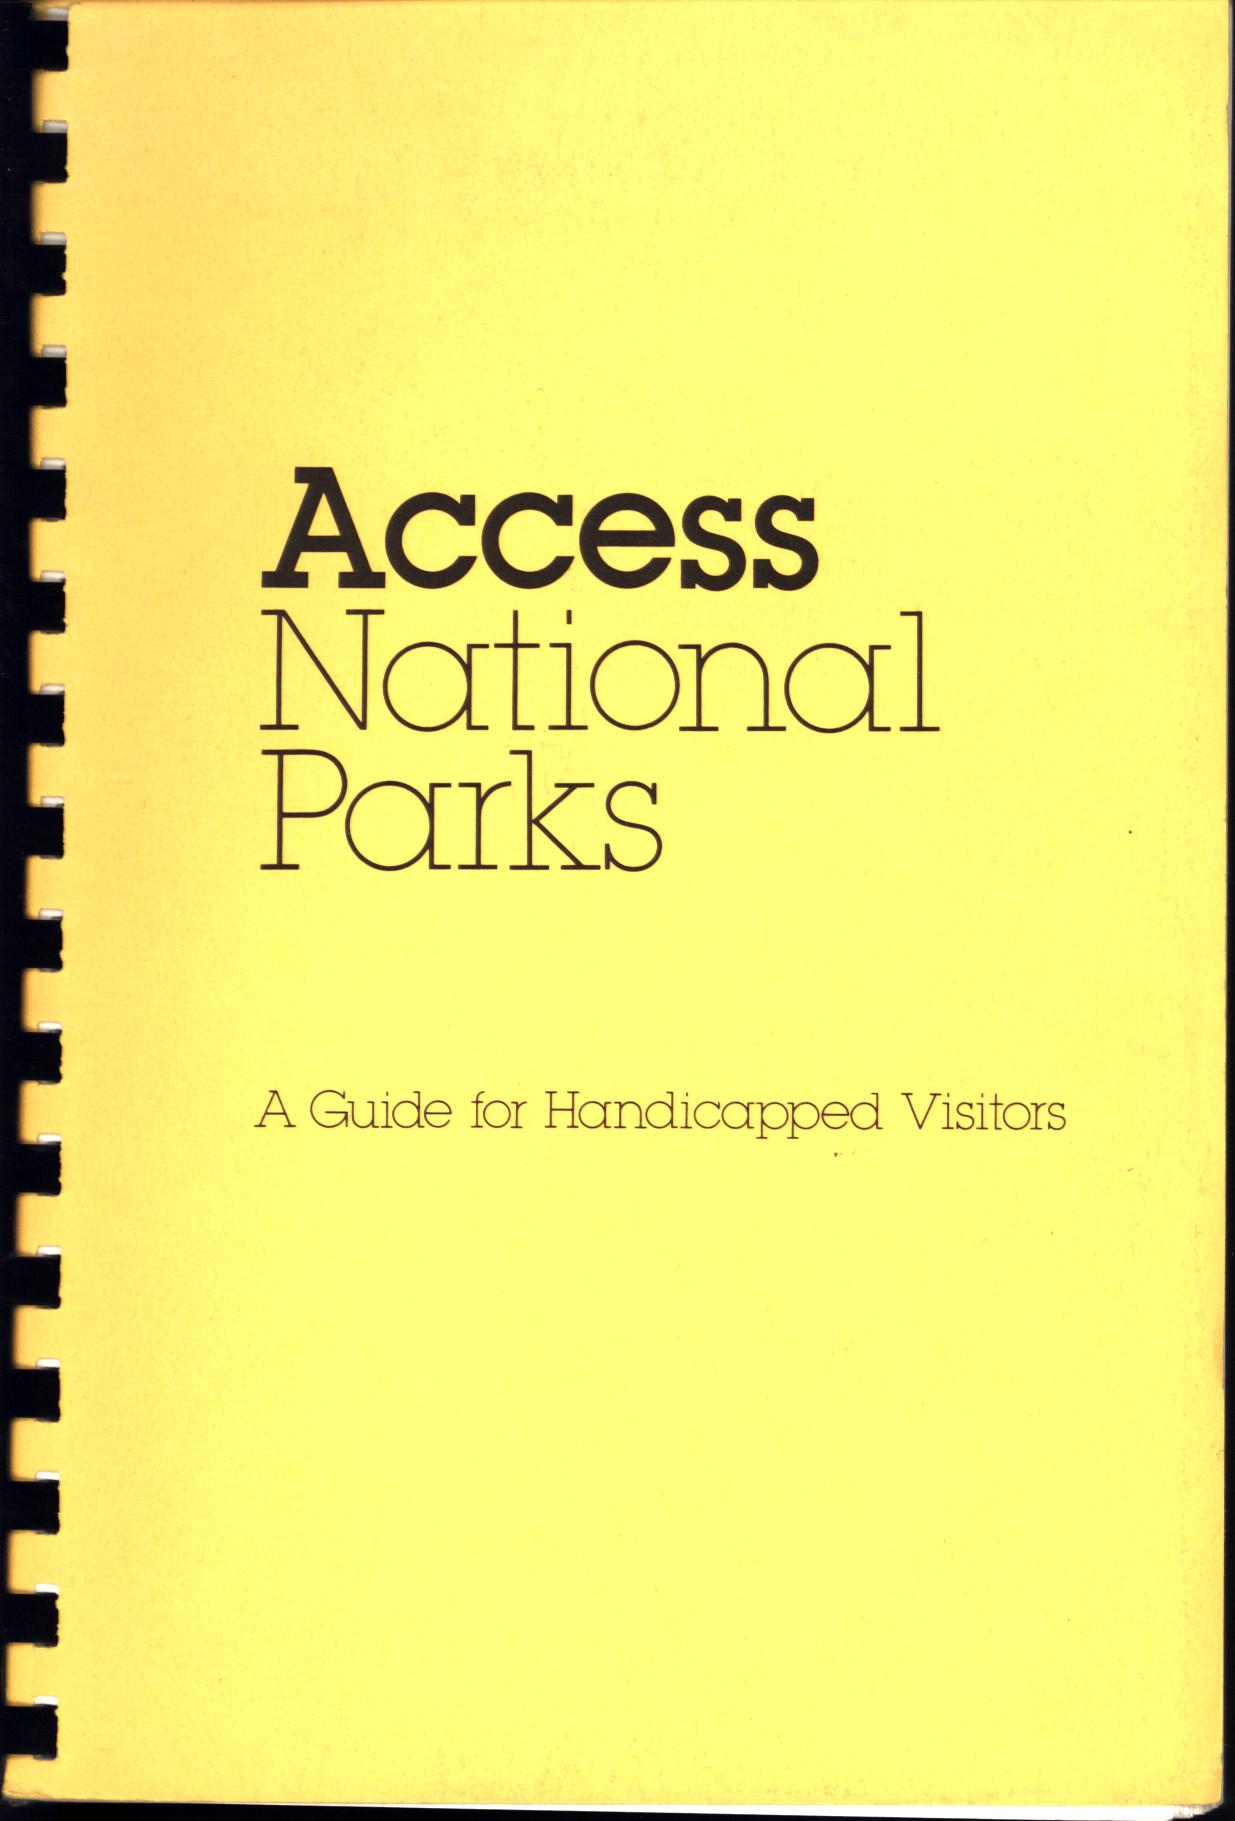 ACCESS NATIONAL PARKS: a guide for handicapped visitors